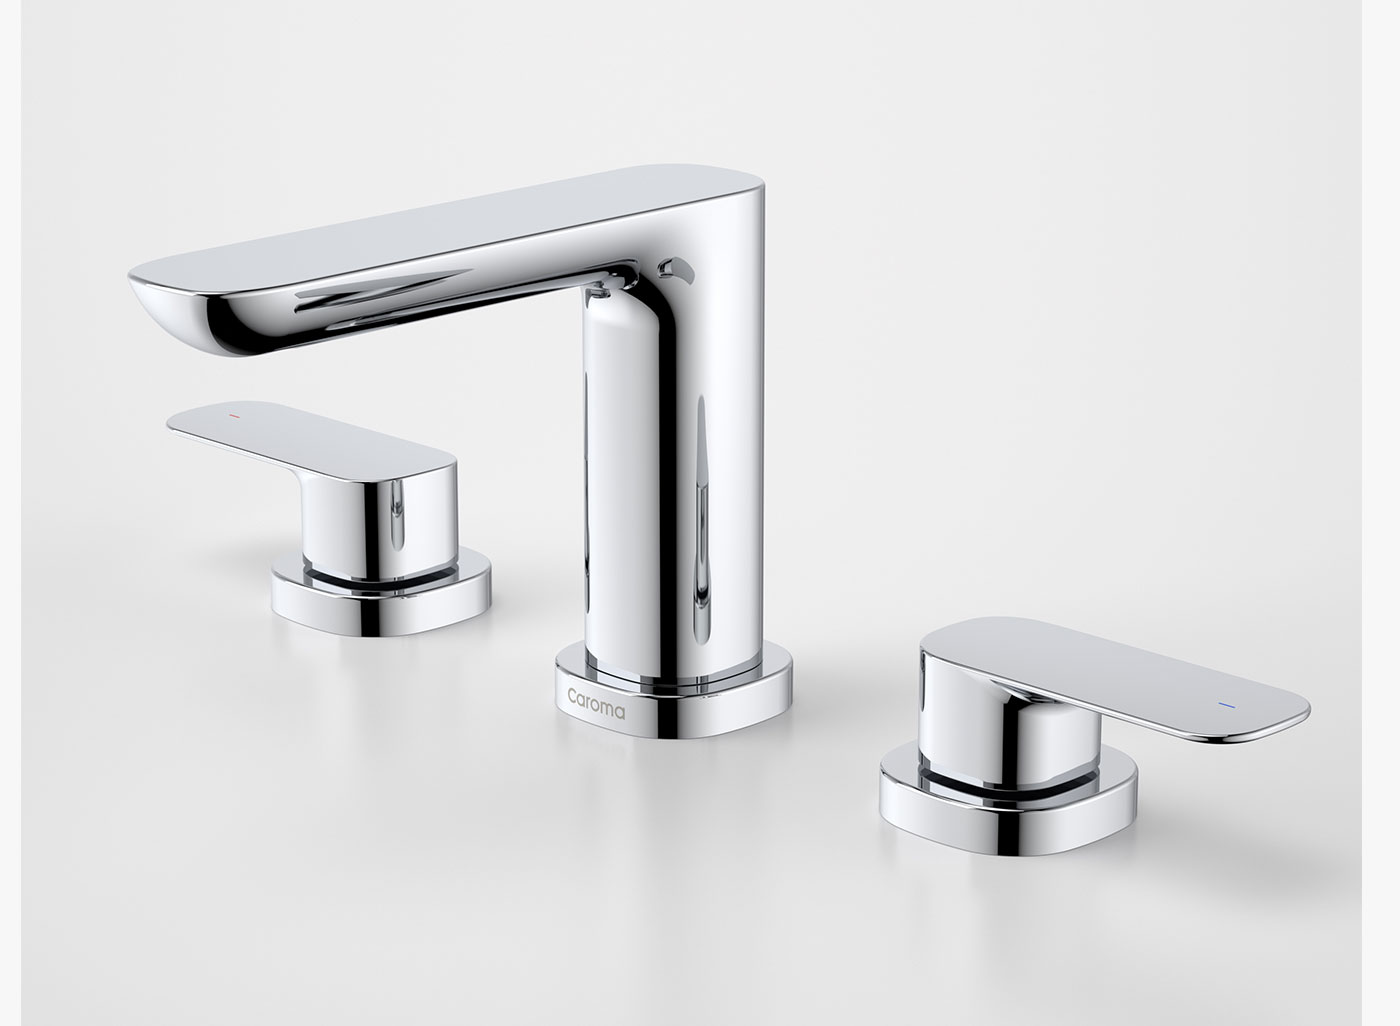 Contura tapware is meticulously detailed and strikingly sculptural. Inspired by European trends and designed to suit an Australian sense of style